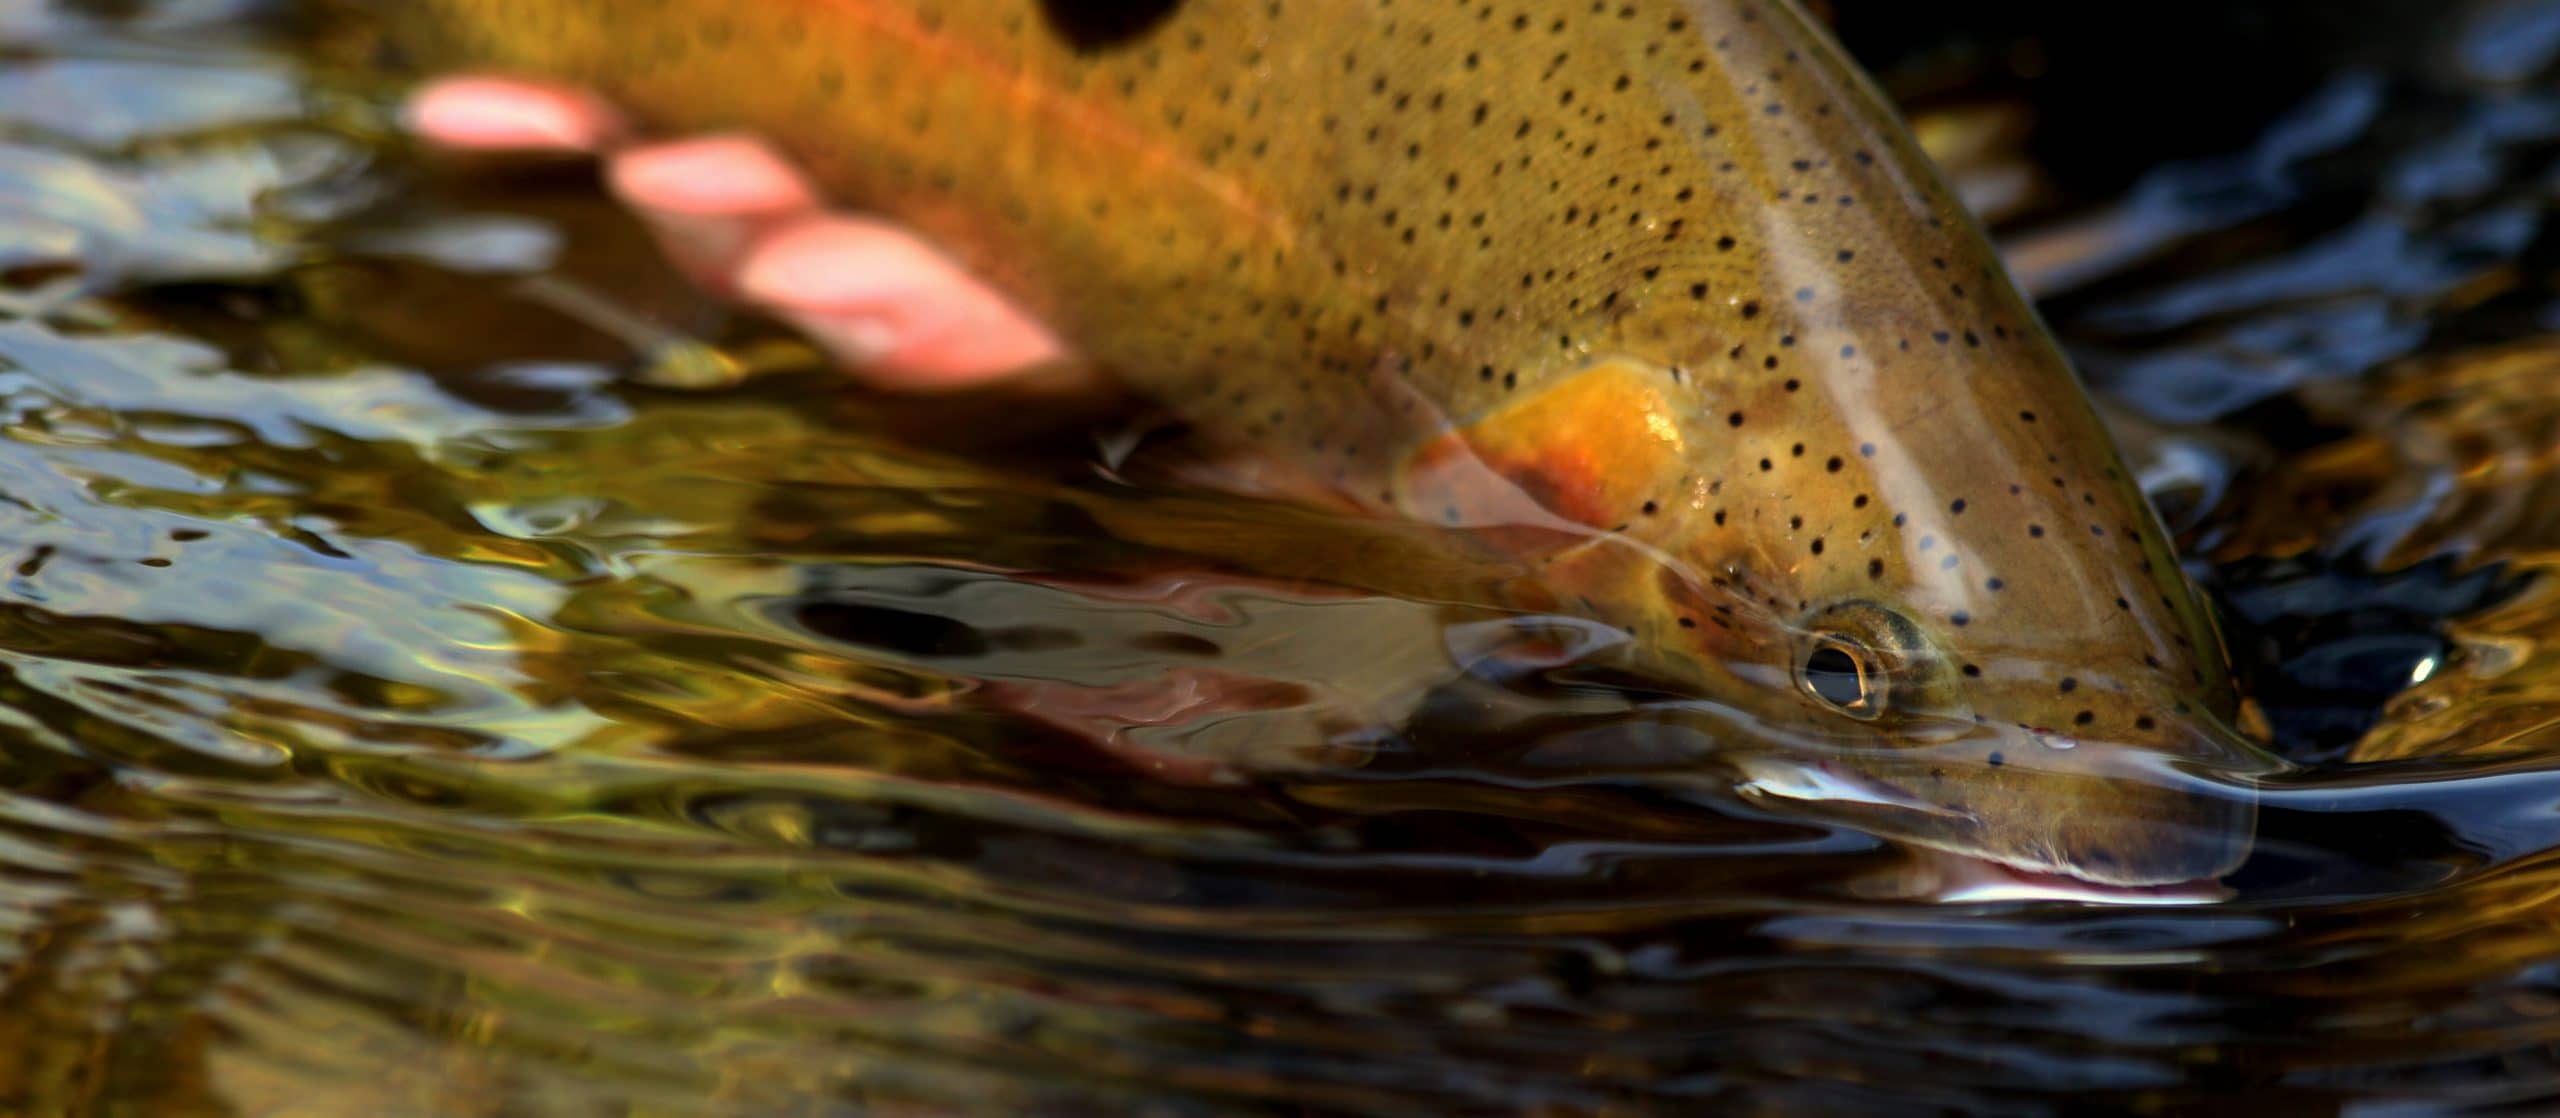 Give Back to Montana’s Fish and Wildlife This Holiday